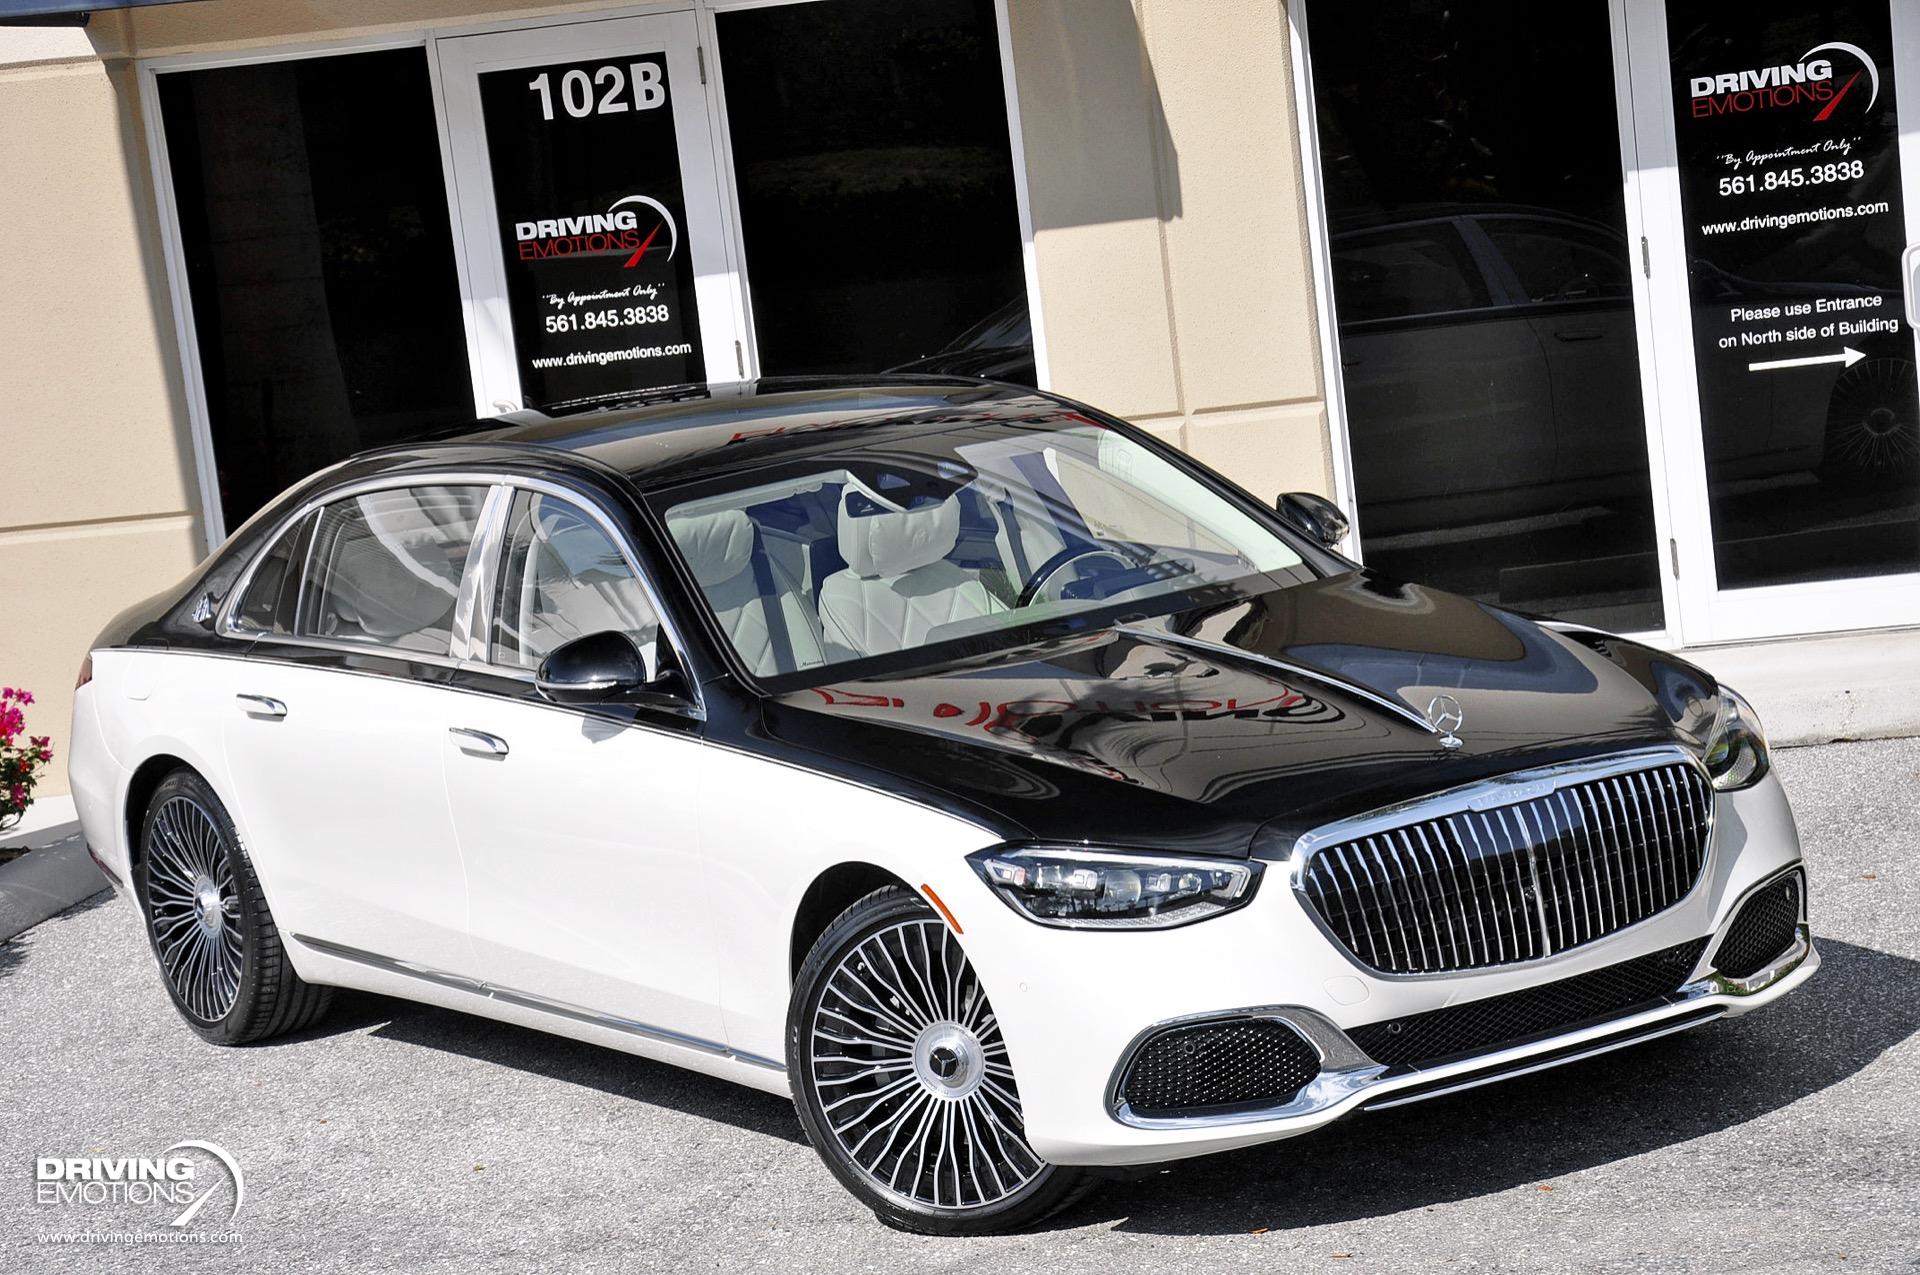 Used 2022 Mercedes-Benz S580 Maybach Mercedes-Maybach S 580 4MATIC! TWO-TONE PAINT! HIGH MSRP!! | Lake Park, FL